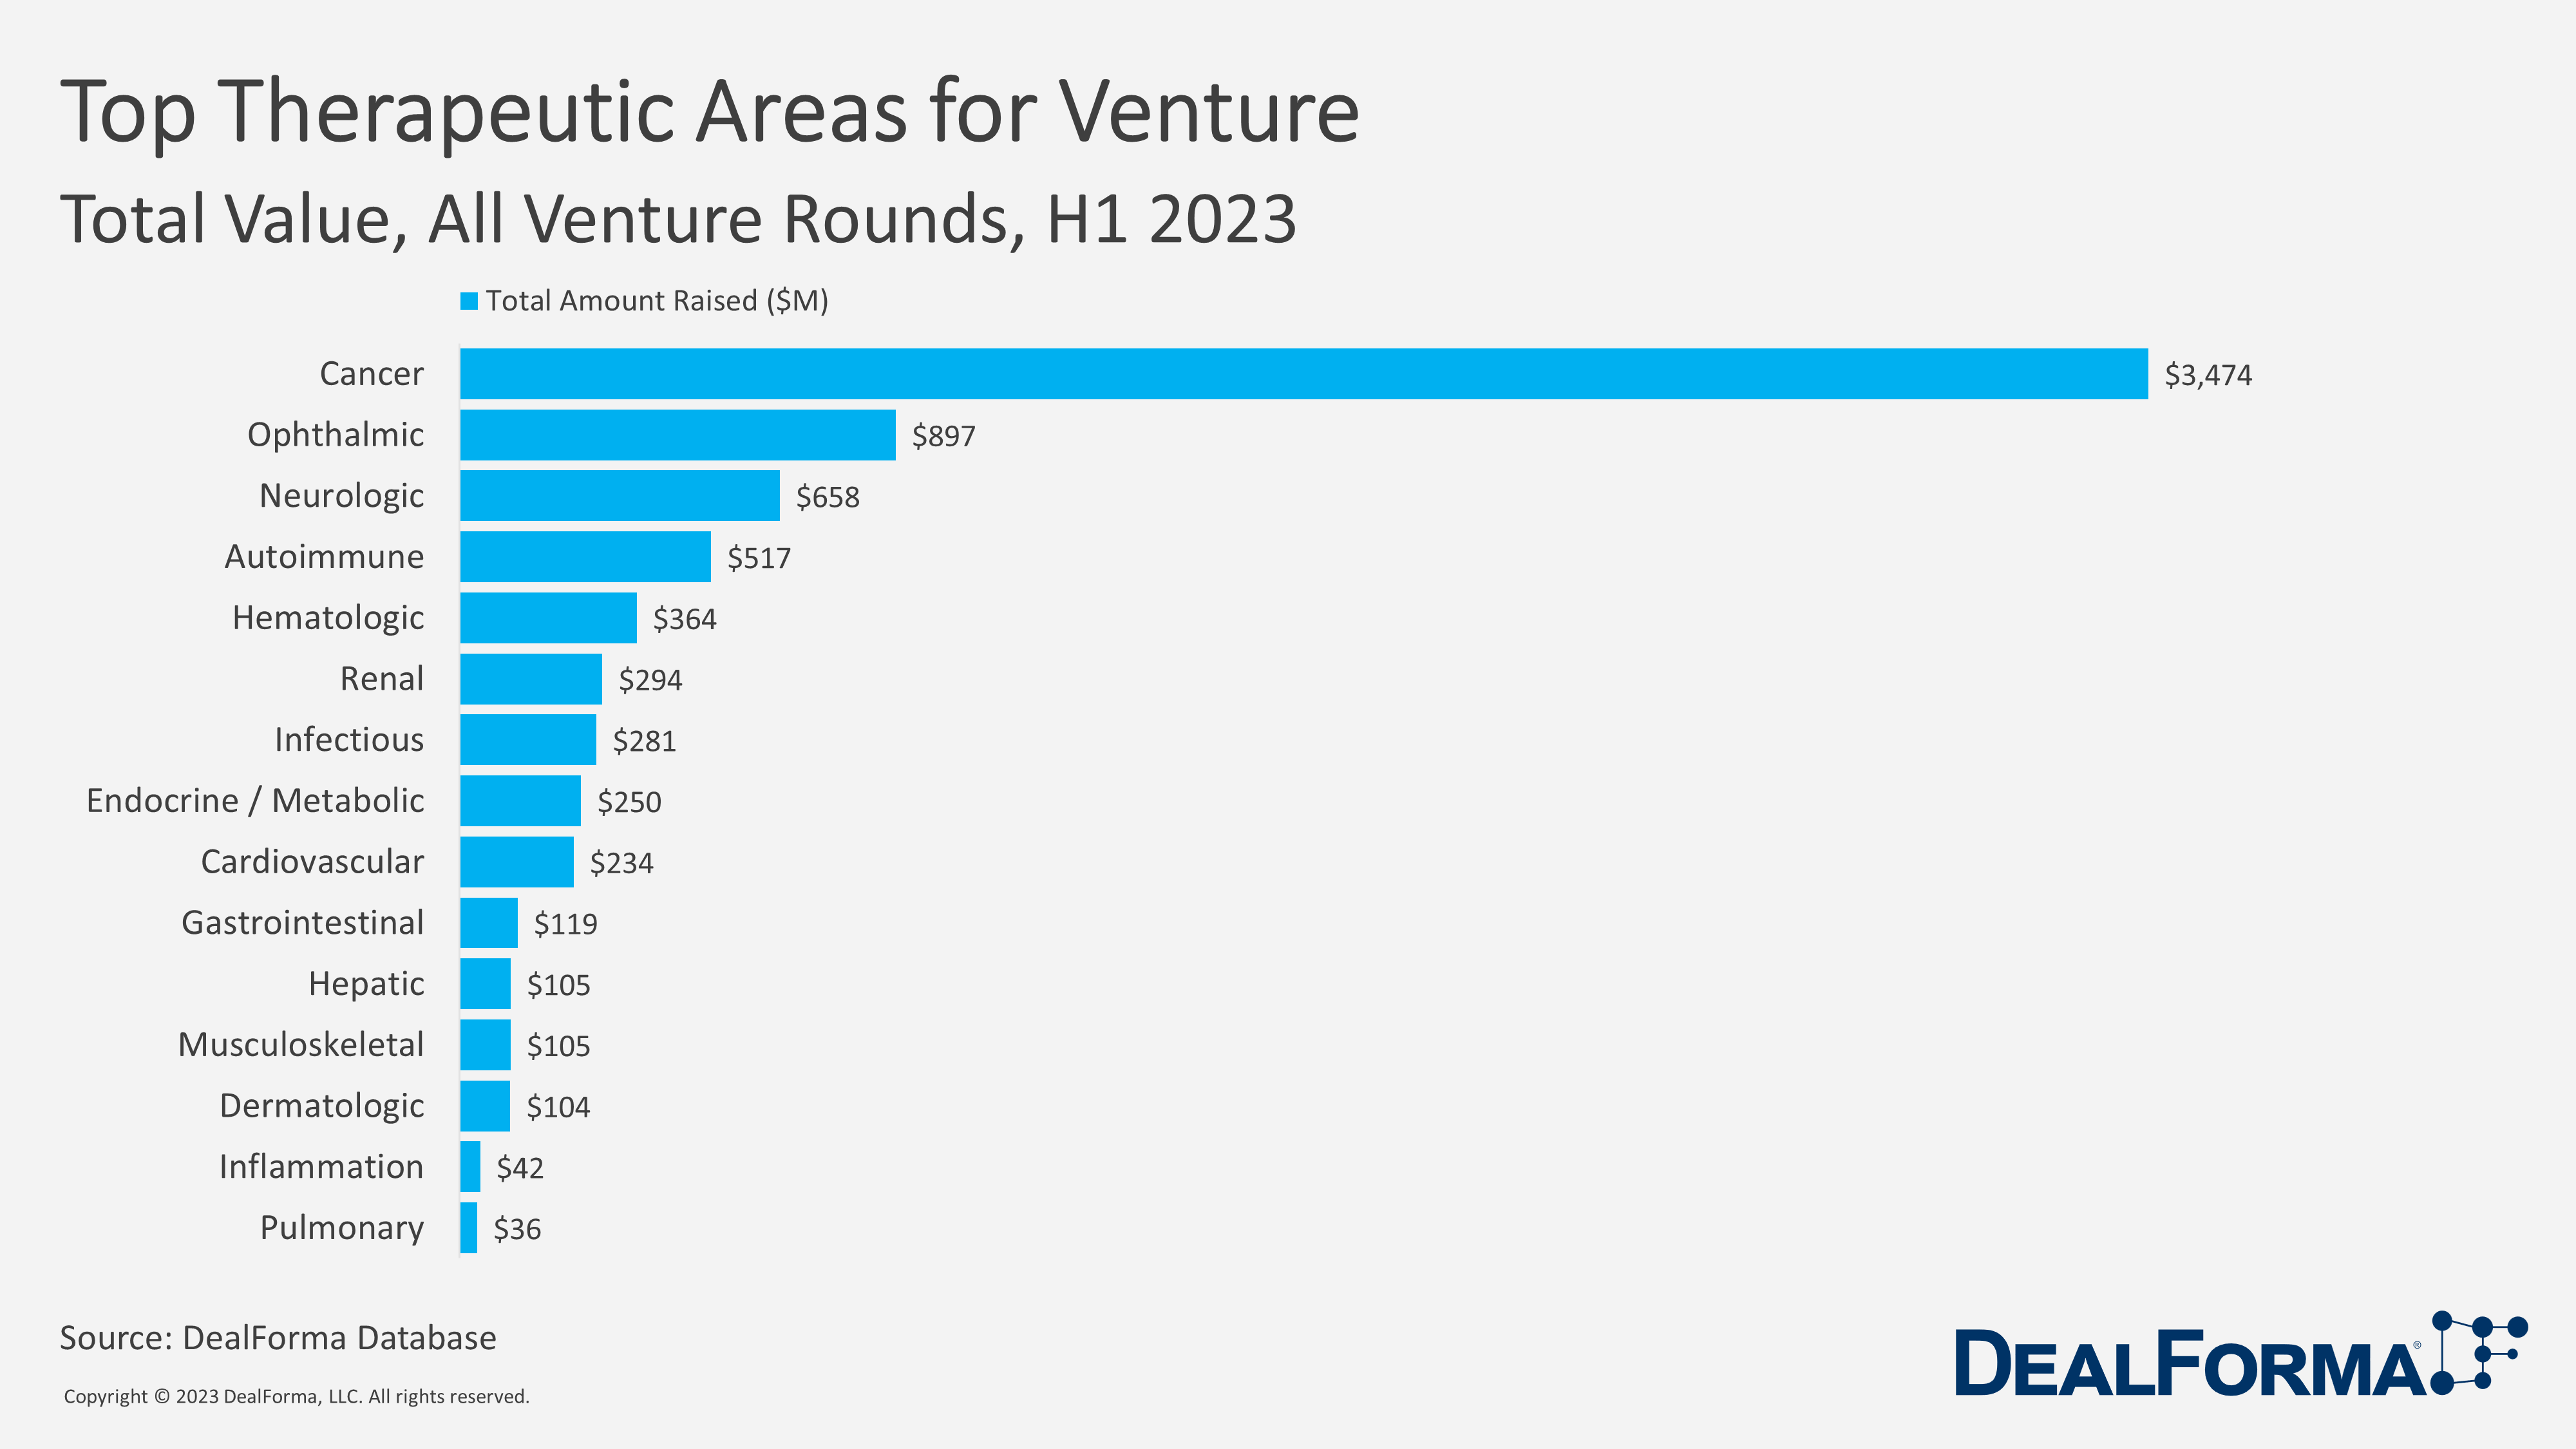 Top Therapeutic Areas for Venture.